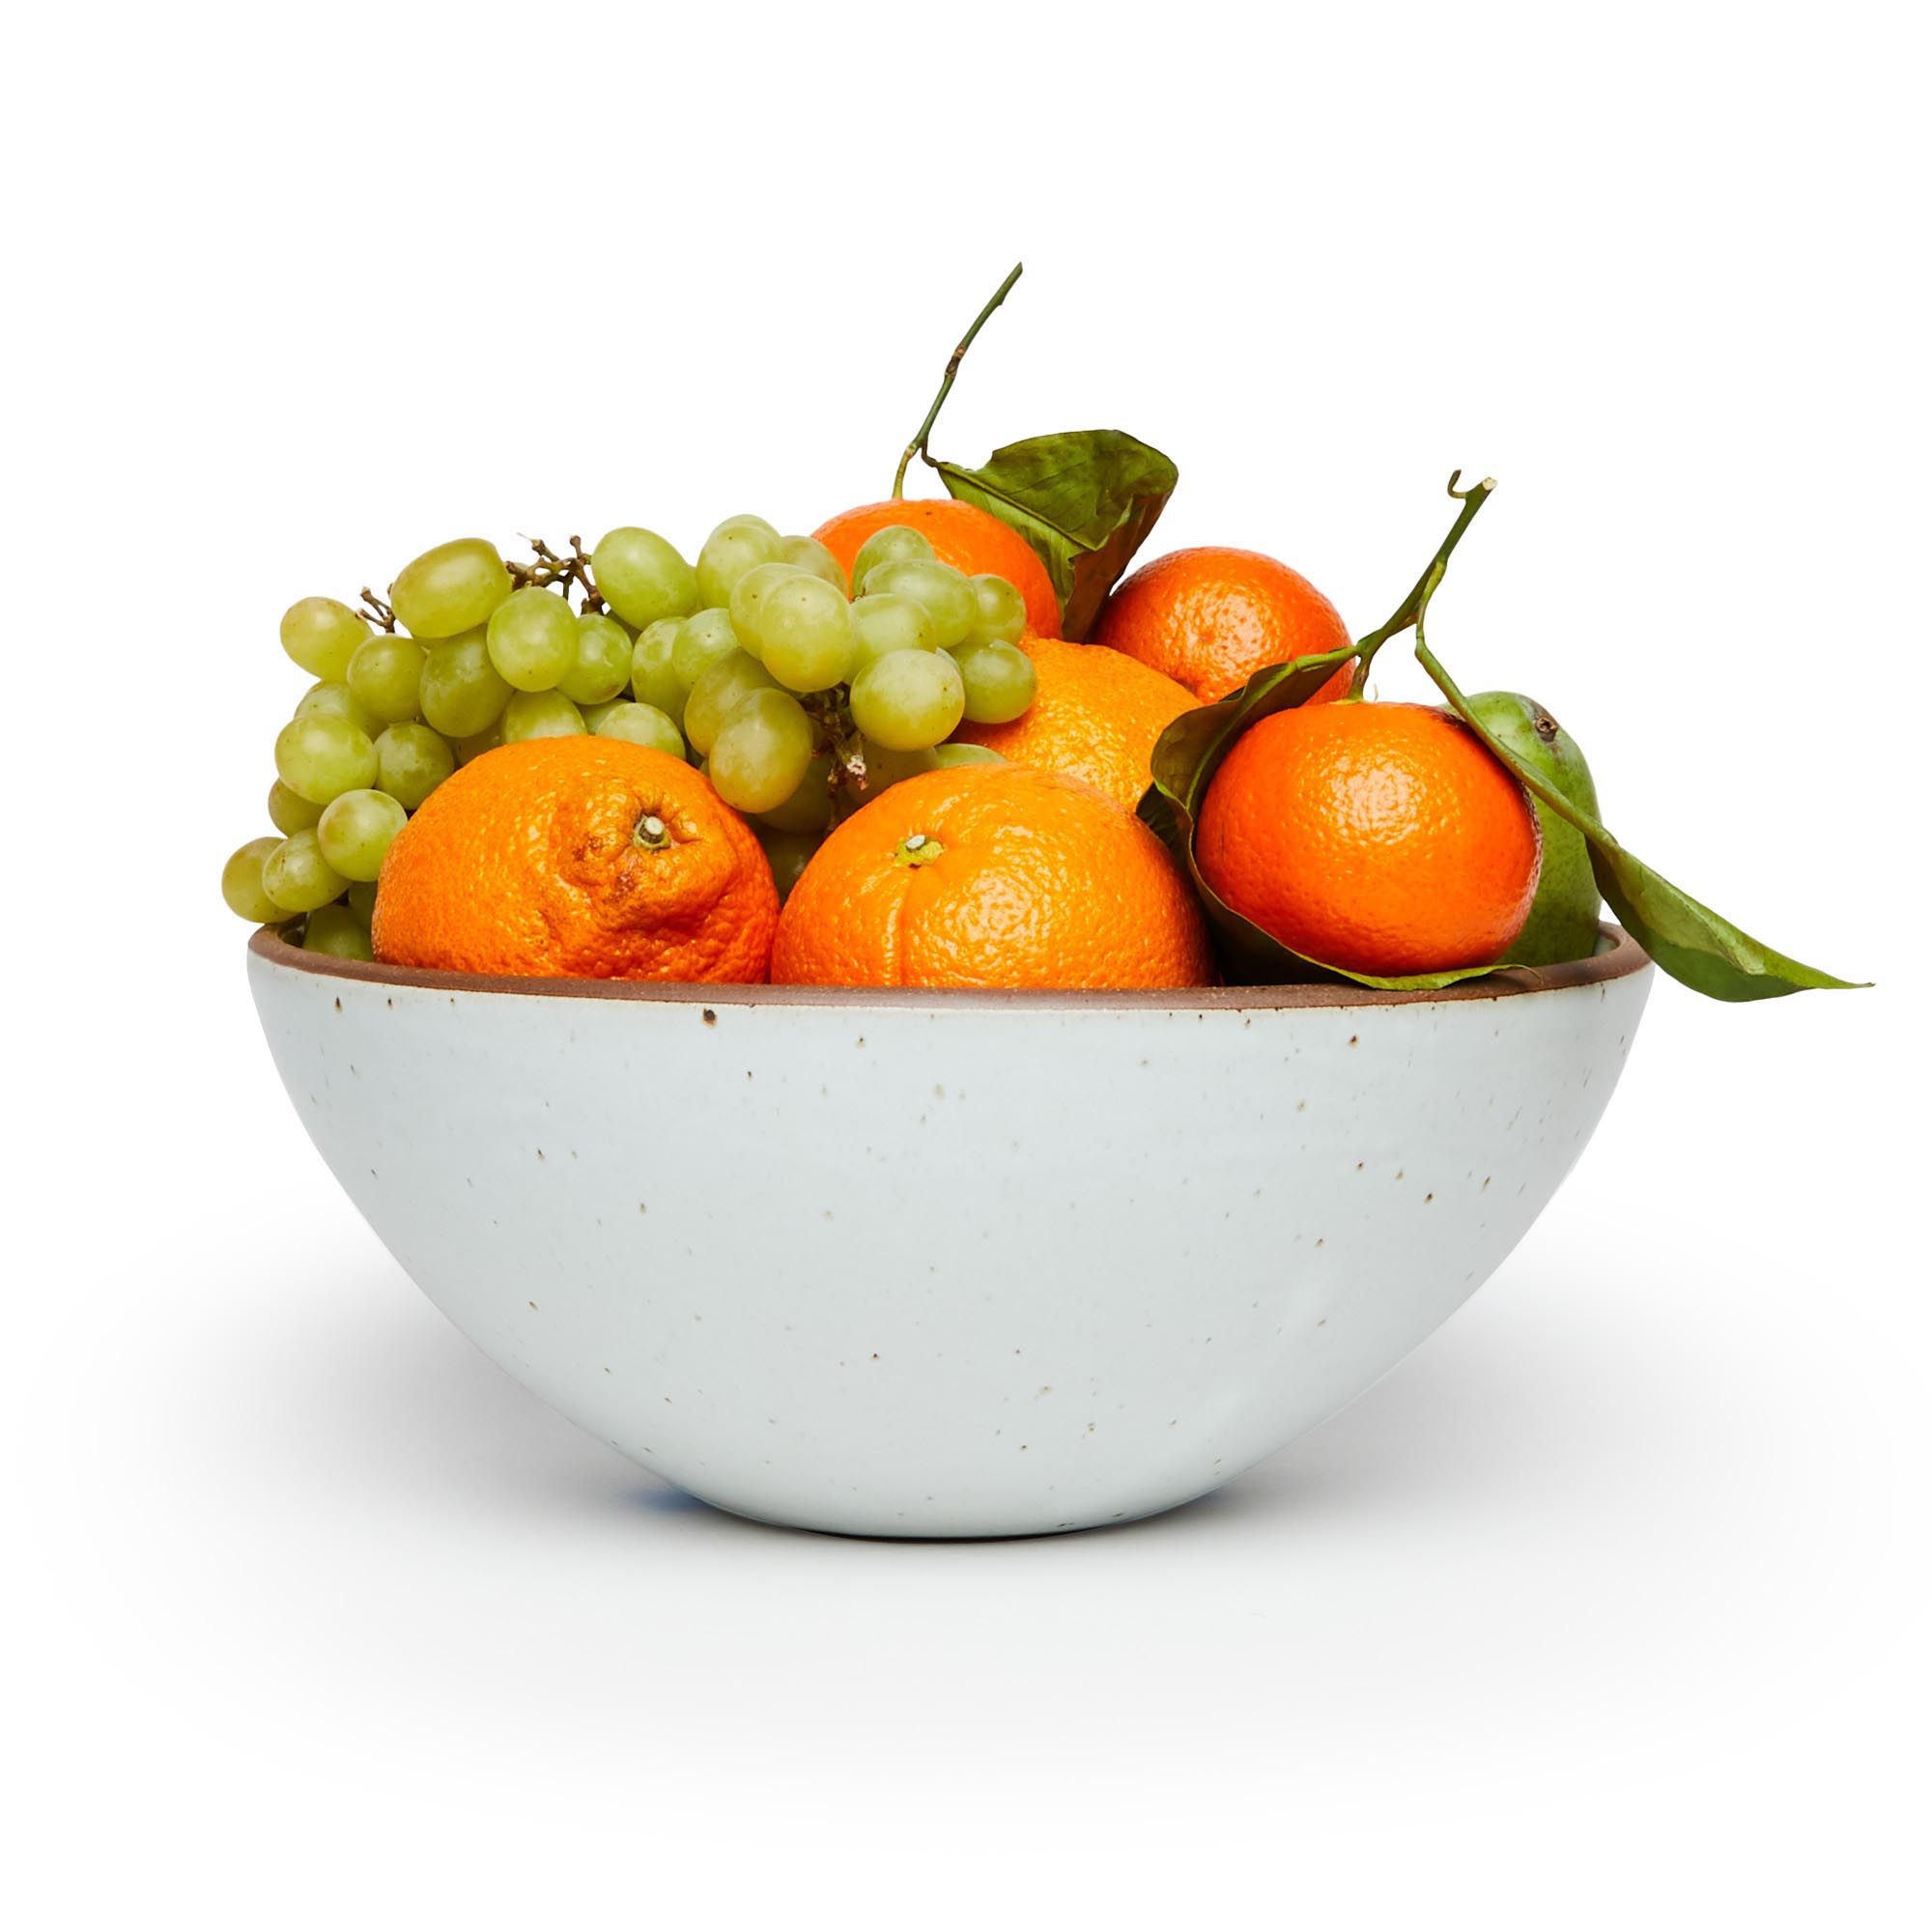 A large ceramic mixing bowl in a cool white color featuring iron speckles and an unglazed rim filled with a medley of fruit